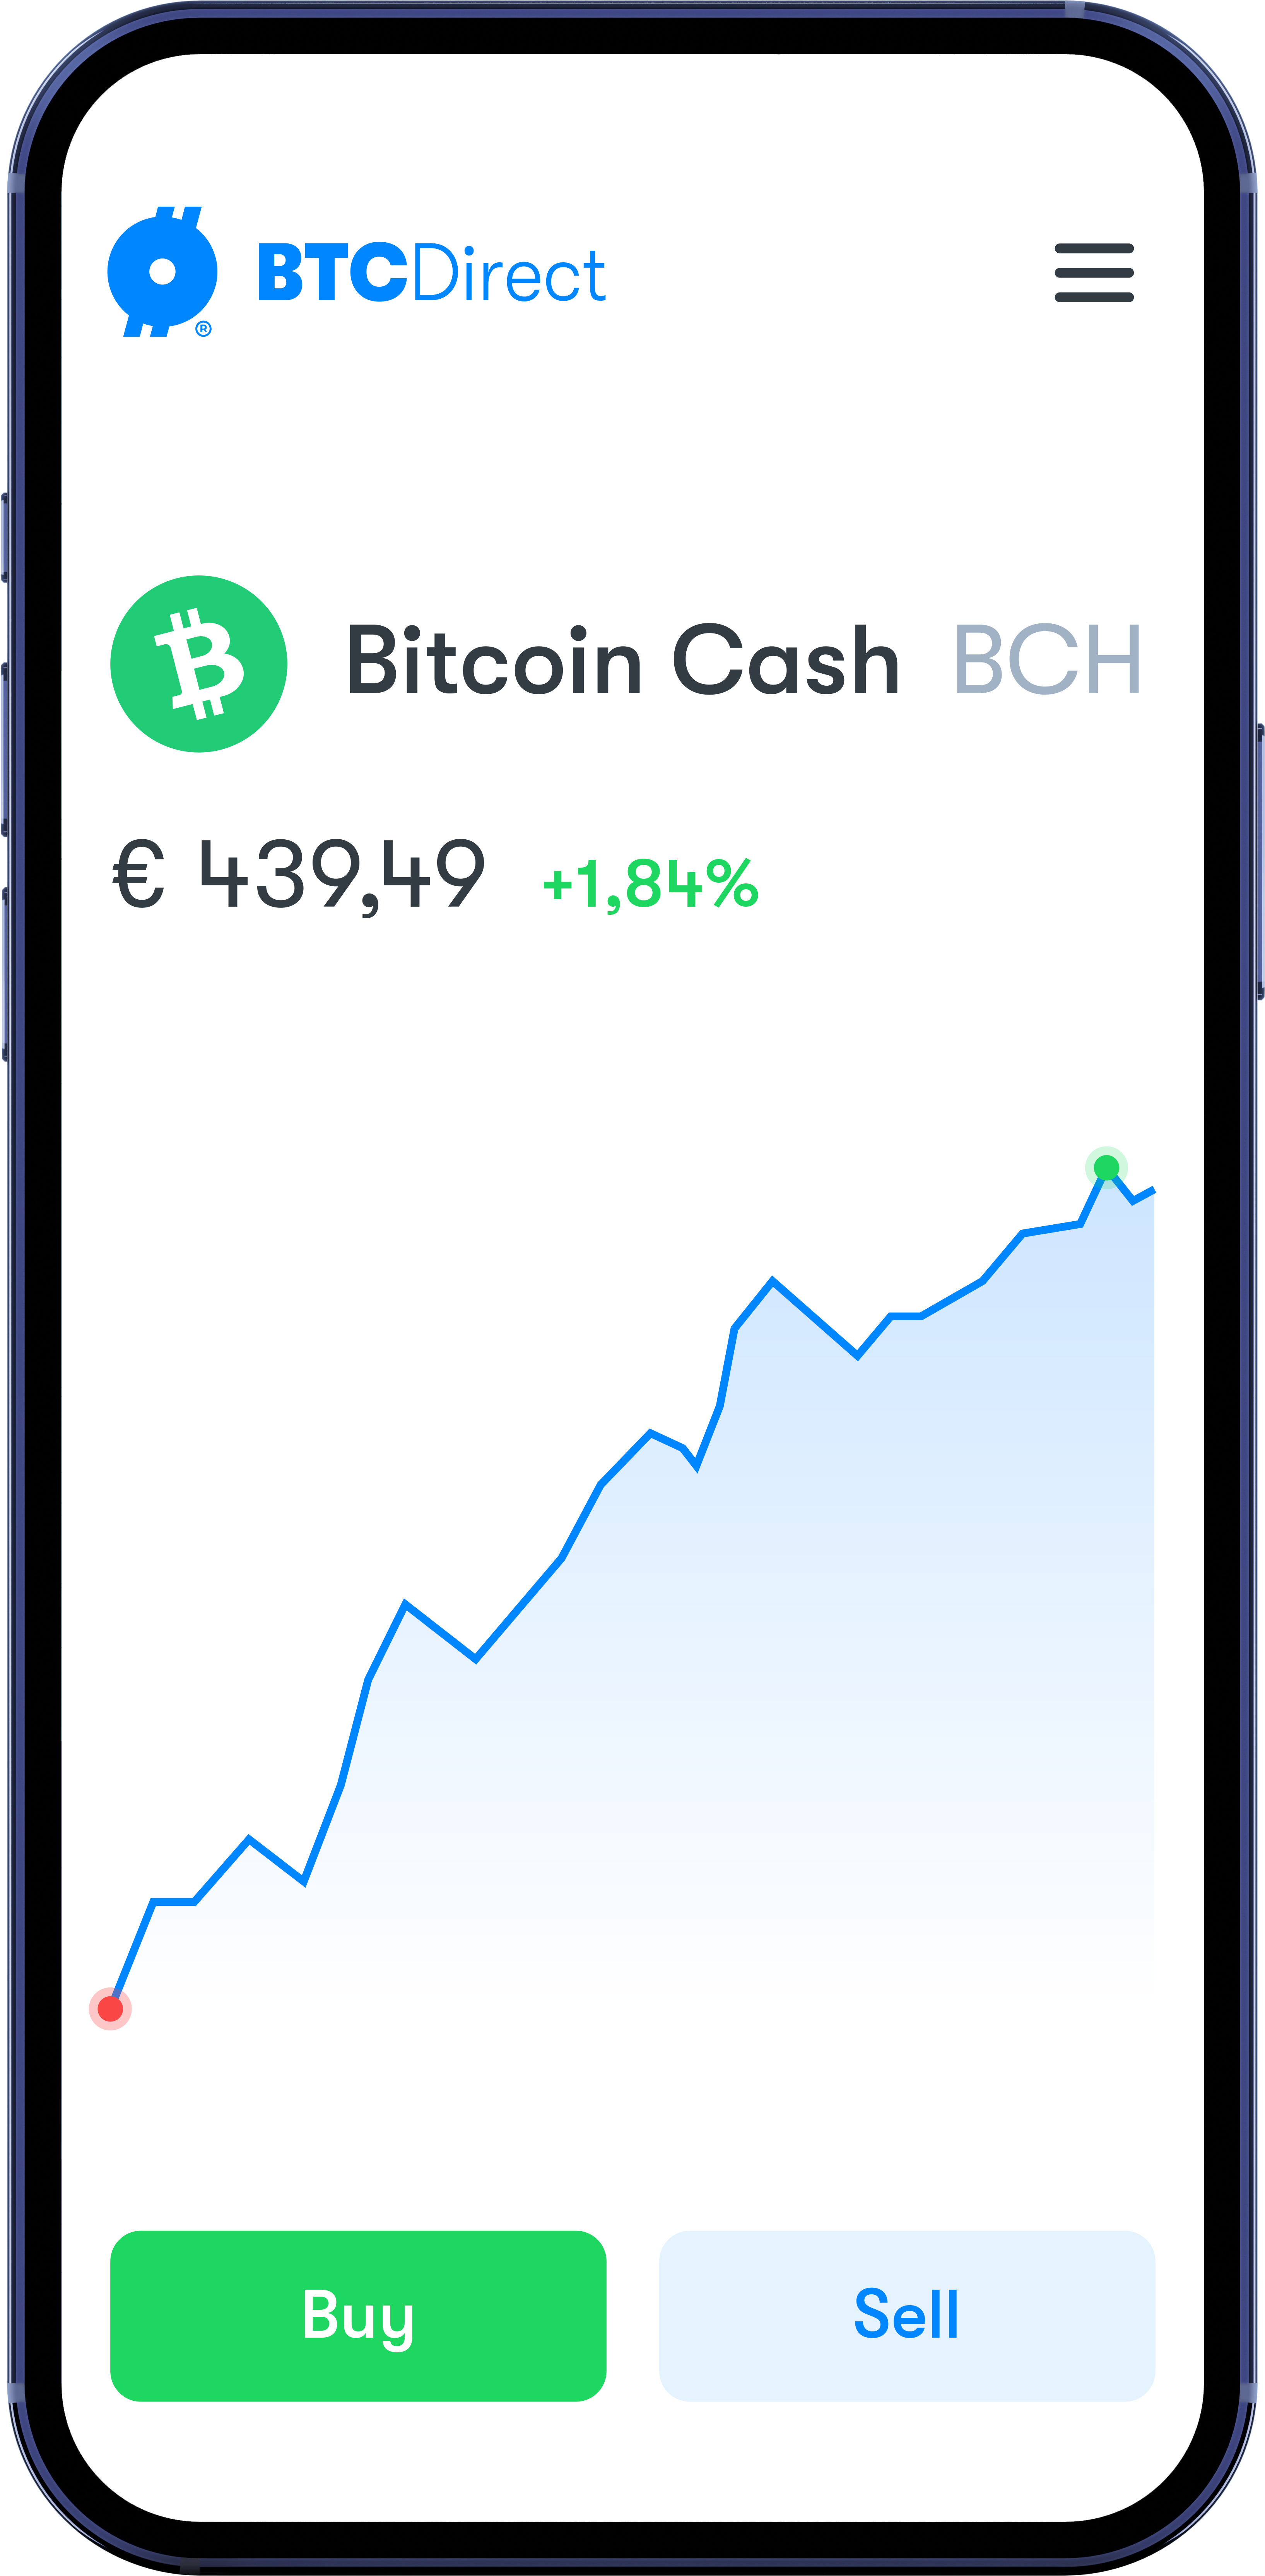 Buying Bitcoin Cash is easy